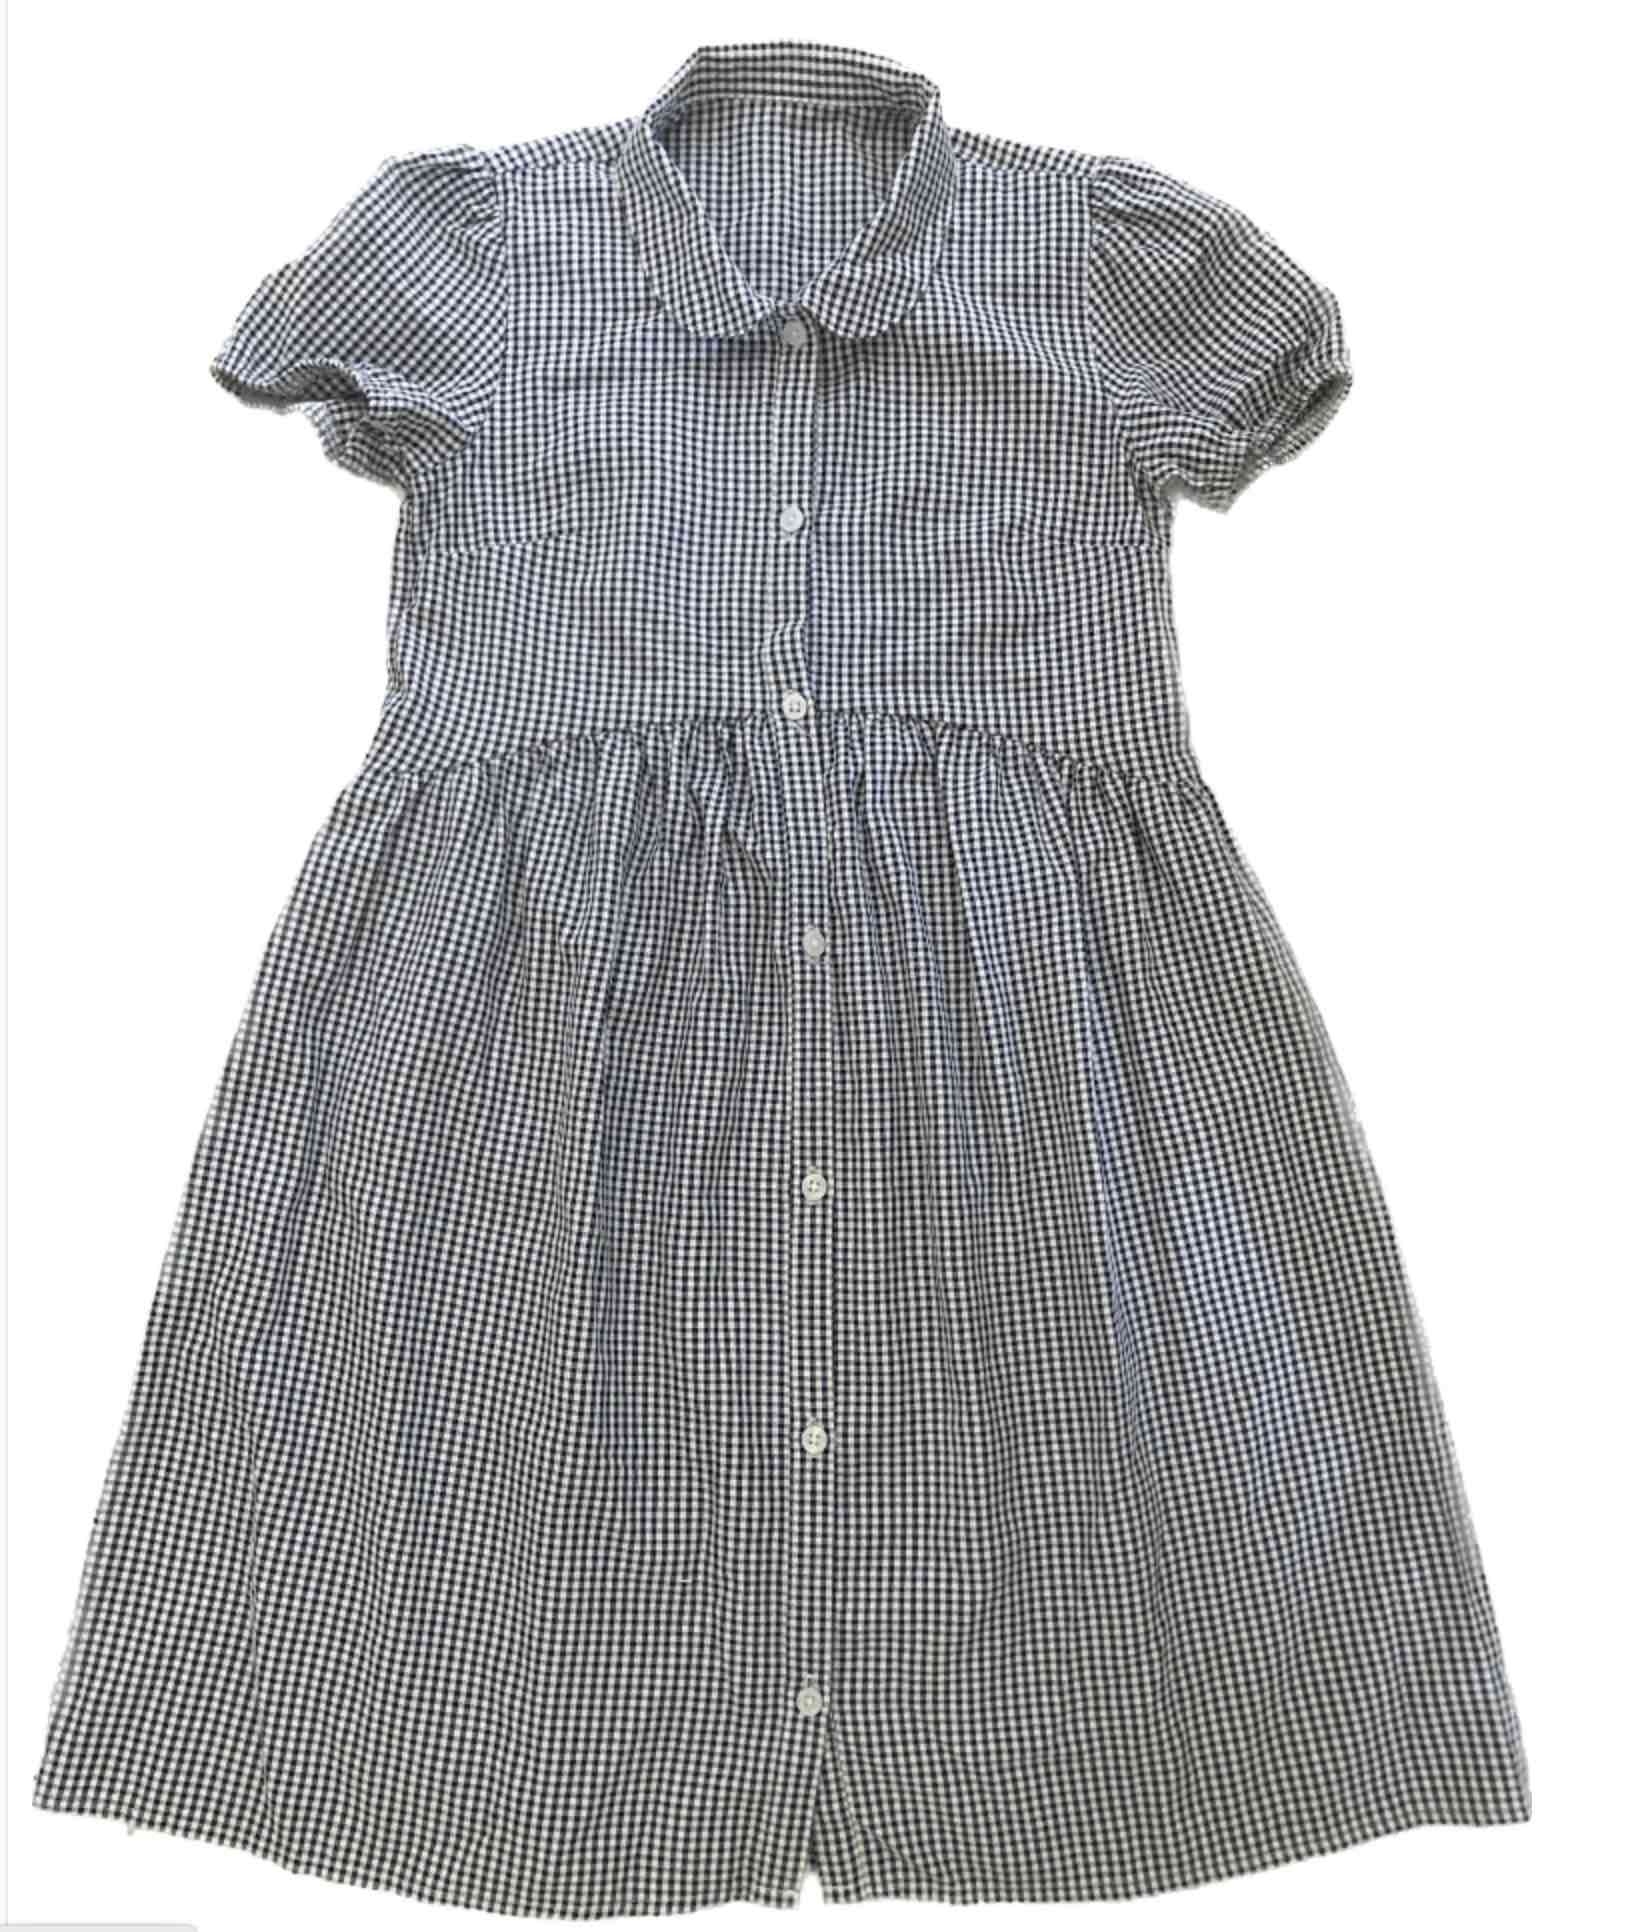 Girls' Navy Blue Gingham Summer Dress, Button Front, Gathered Skirt, 11-12 Y